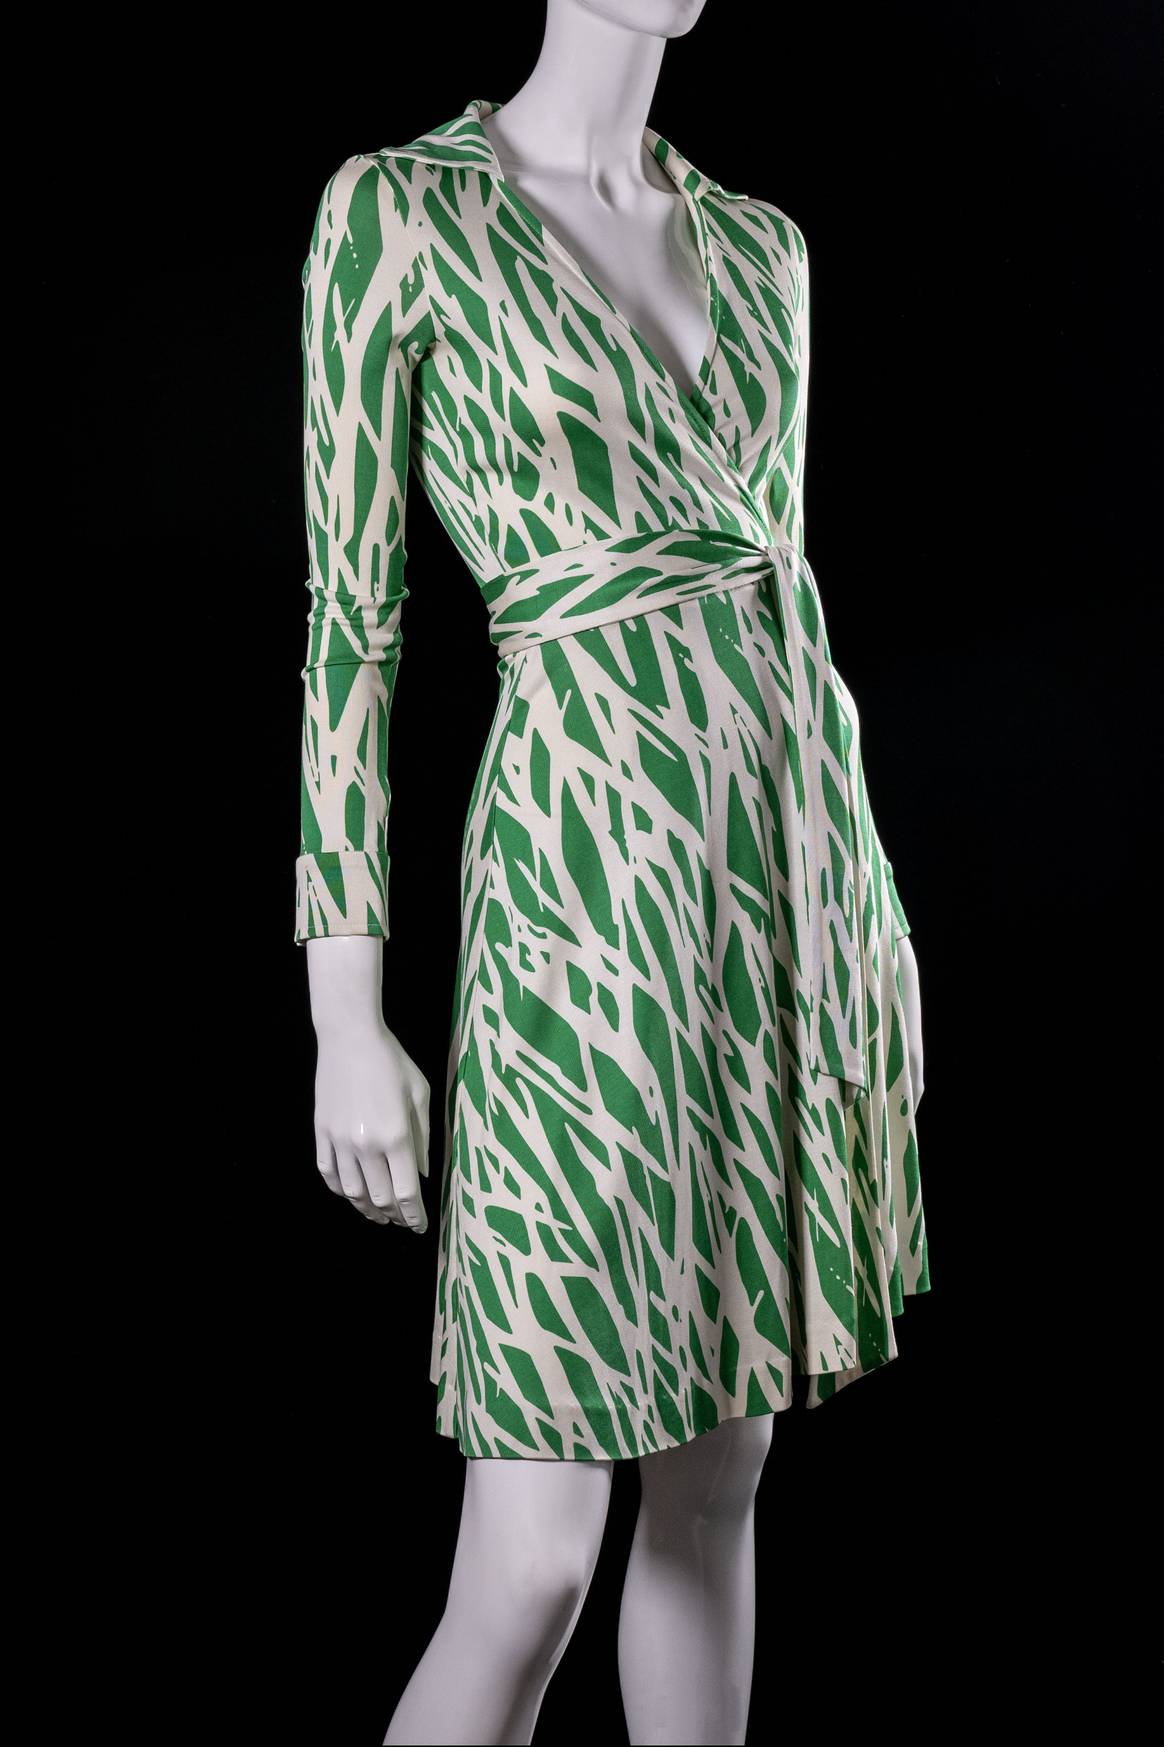 Image: Fashion and Lace Museum, Brussels; Diane von Furstenberg, Printed silk jersey dress, Fashion by E.Gomez